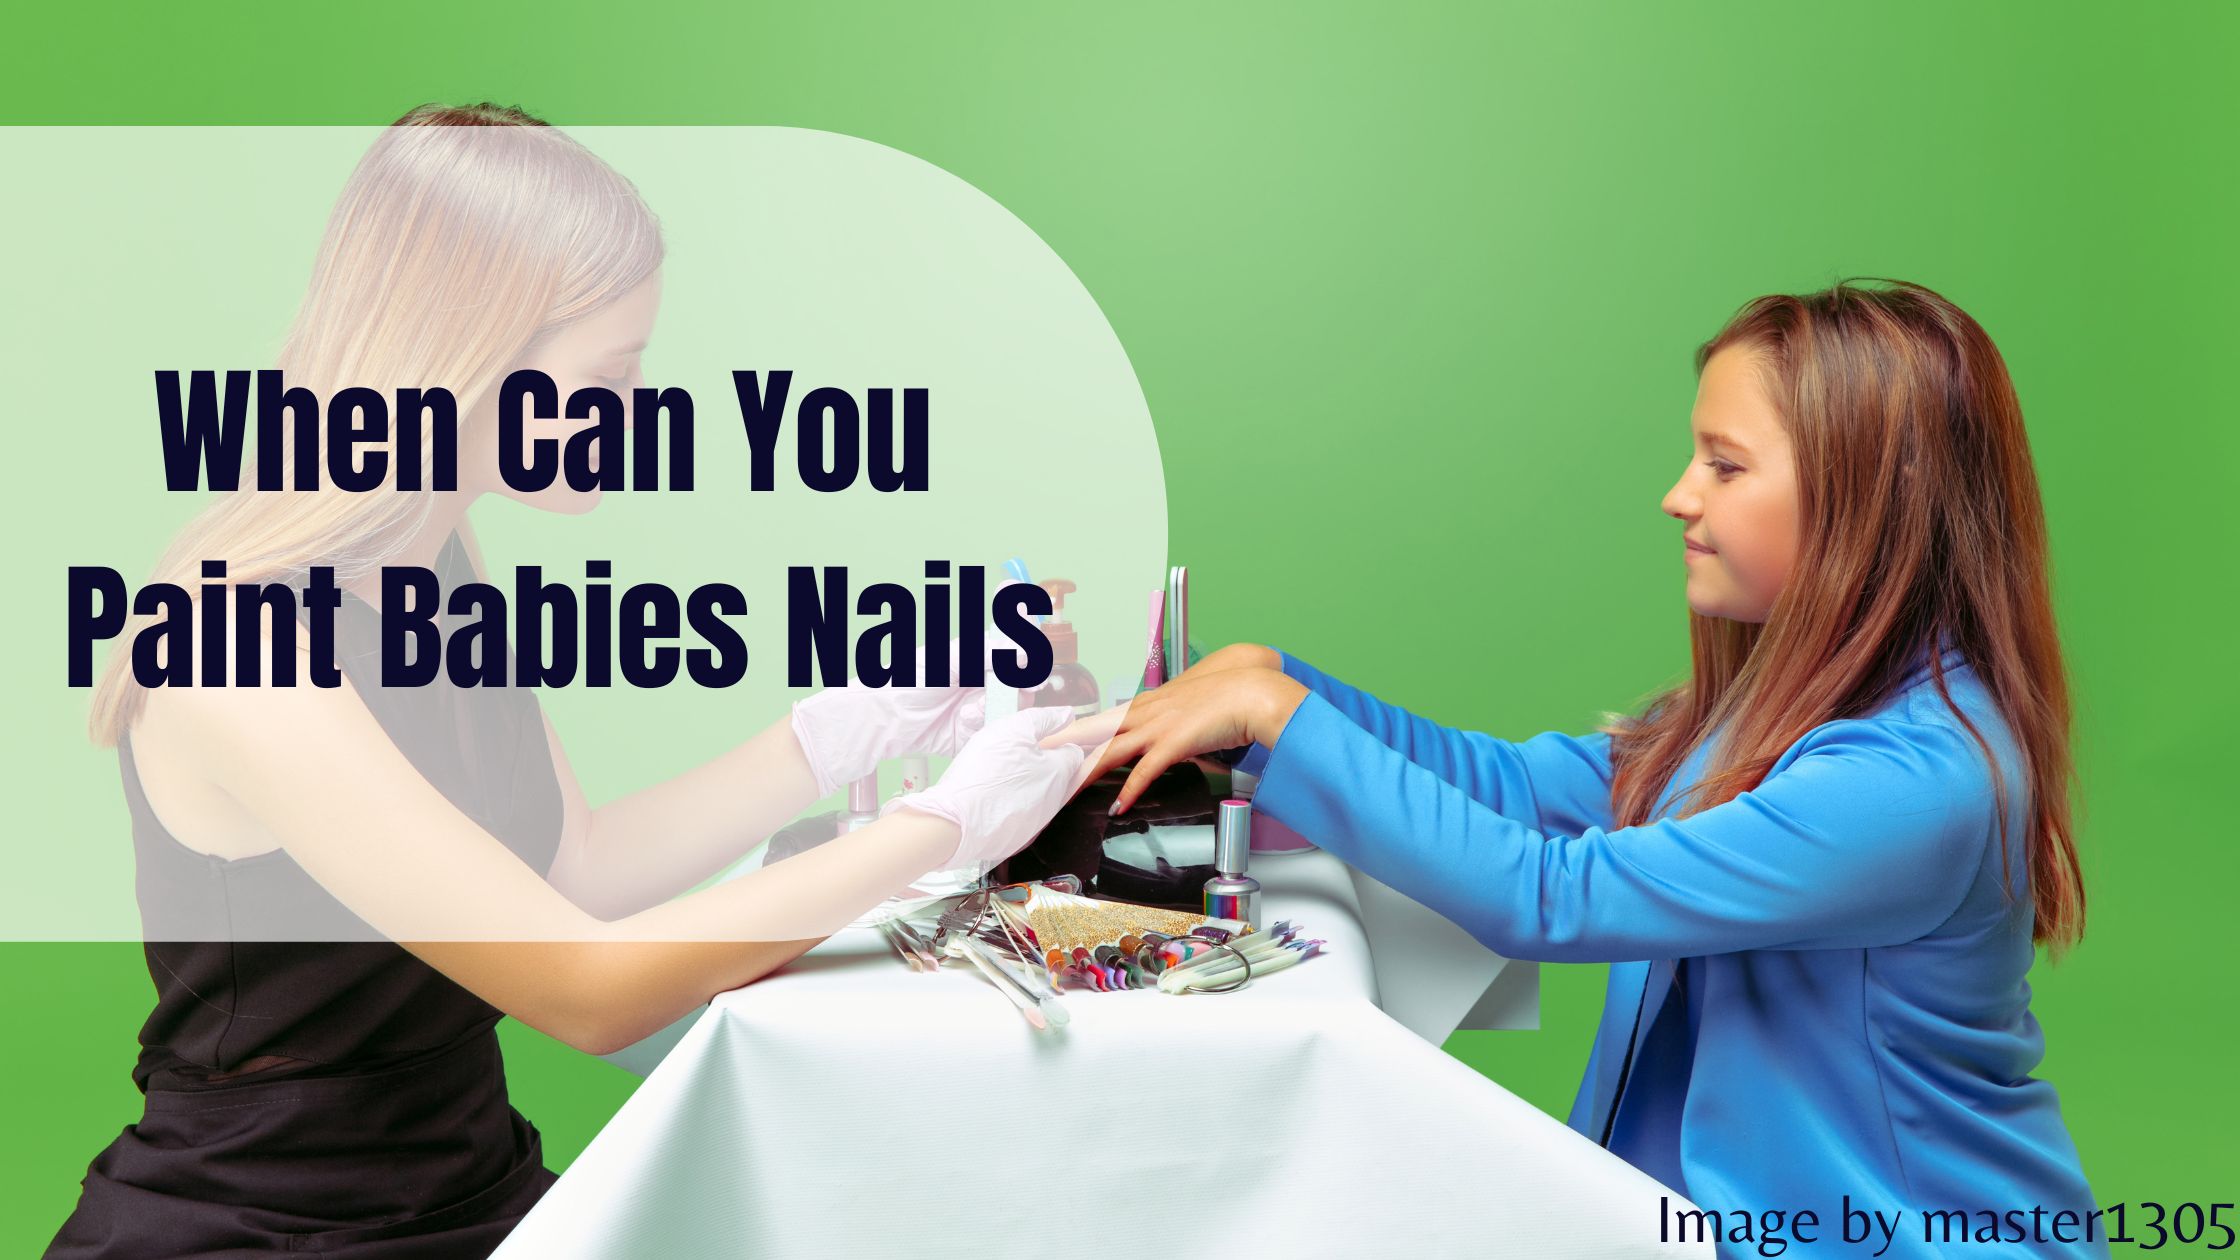 when can you paint babies nails